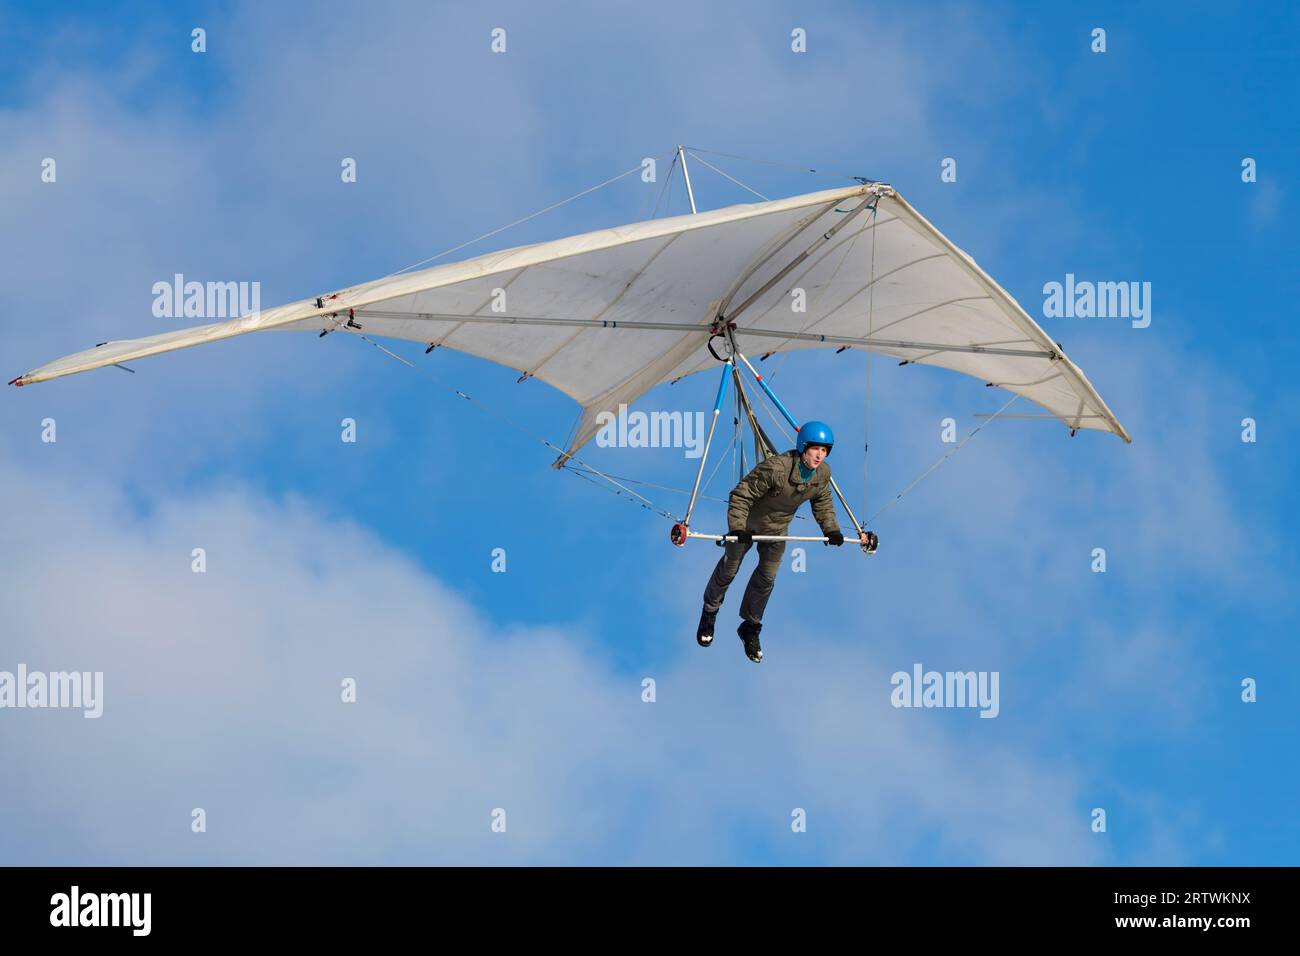 Pilot learning to fly on vintage rogallo hangglider wing Stock Photo